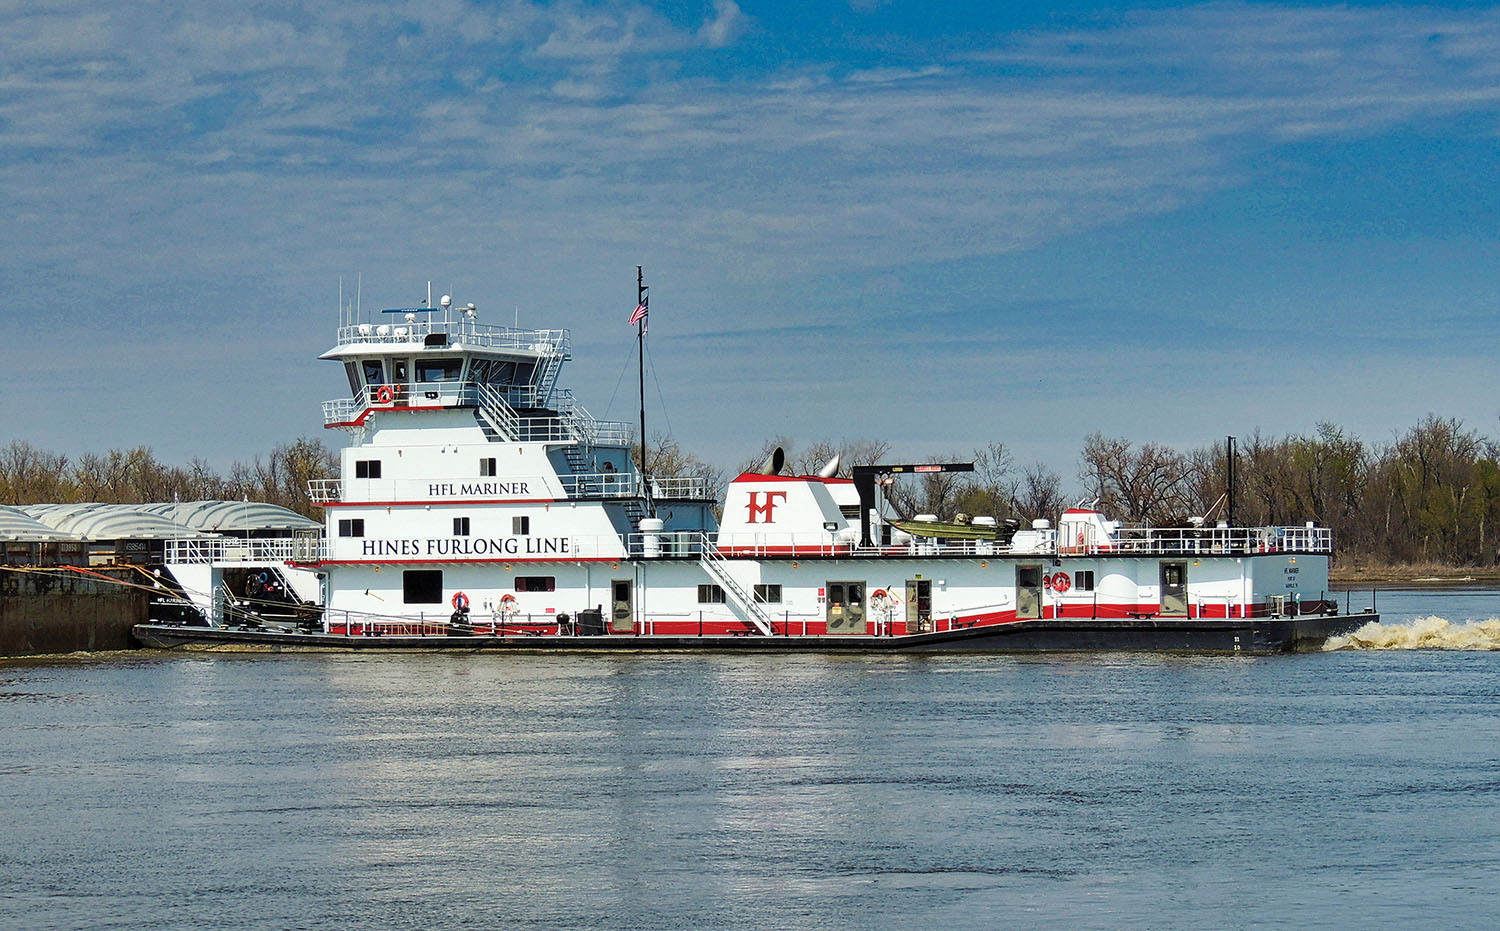 The mv. HFL Mariner is one of the Hines Furlong towboats getting Starlink Maritime low-orbit satellite internet service. (Photo by Mike Herschler)